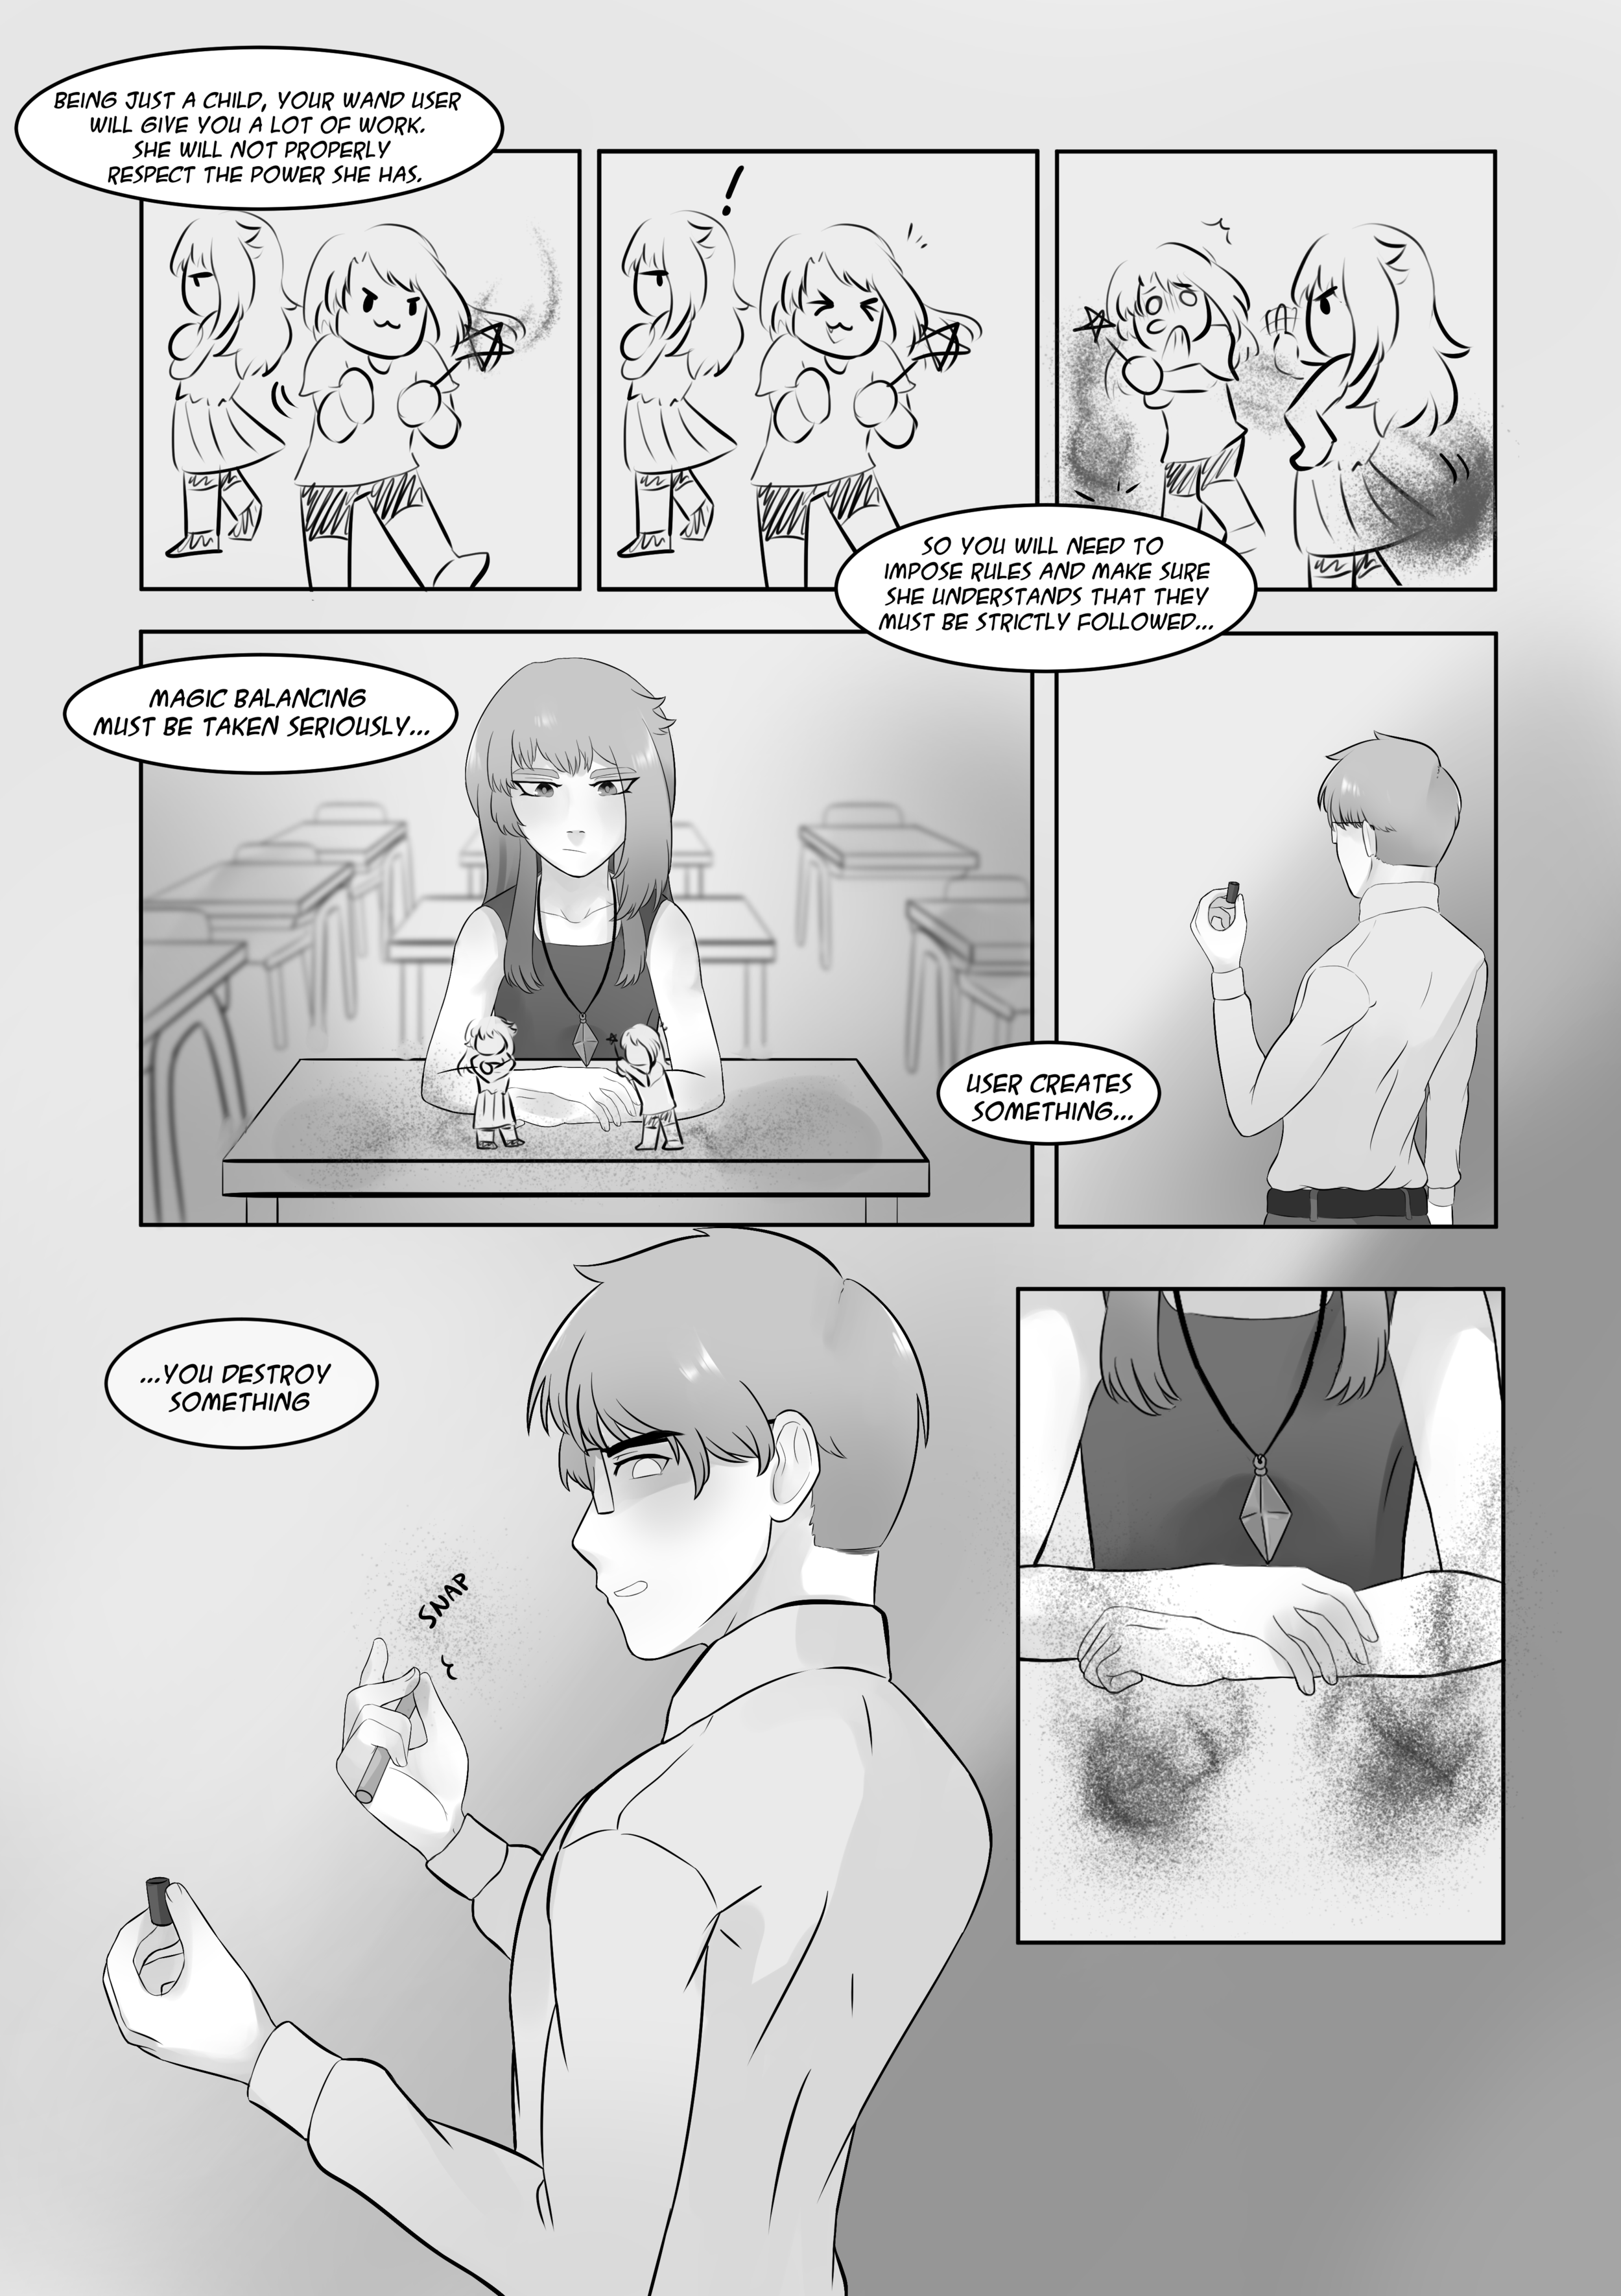 PAGE 12